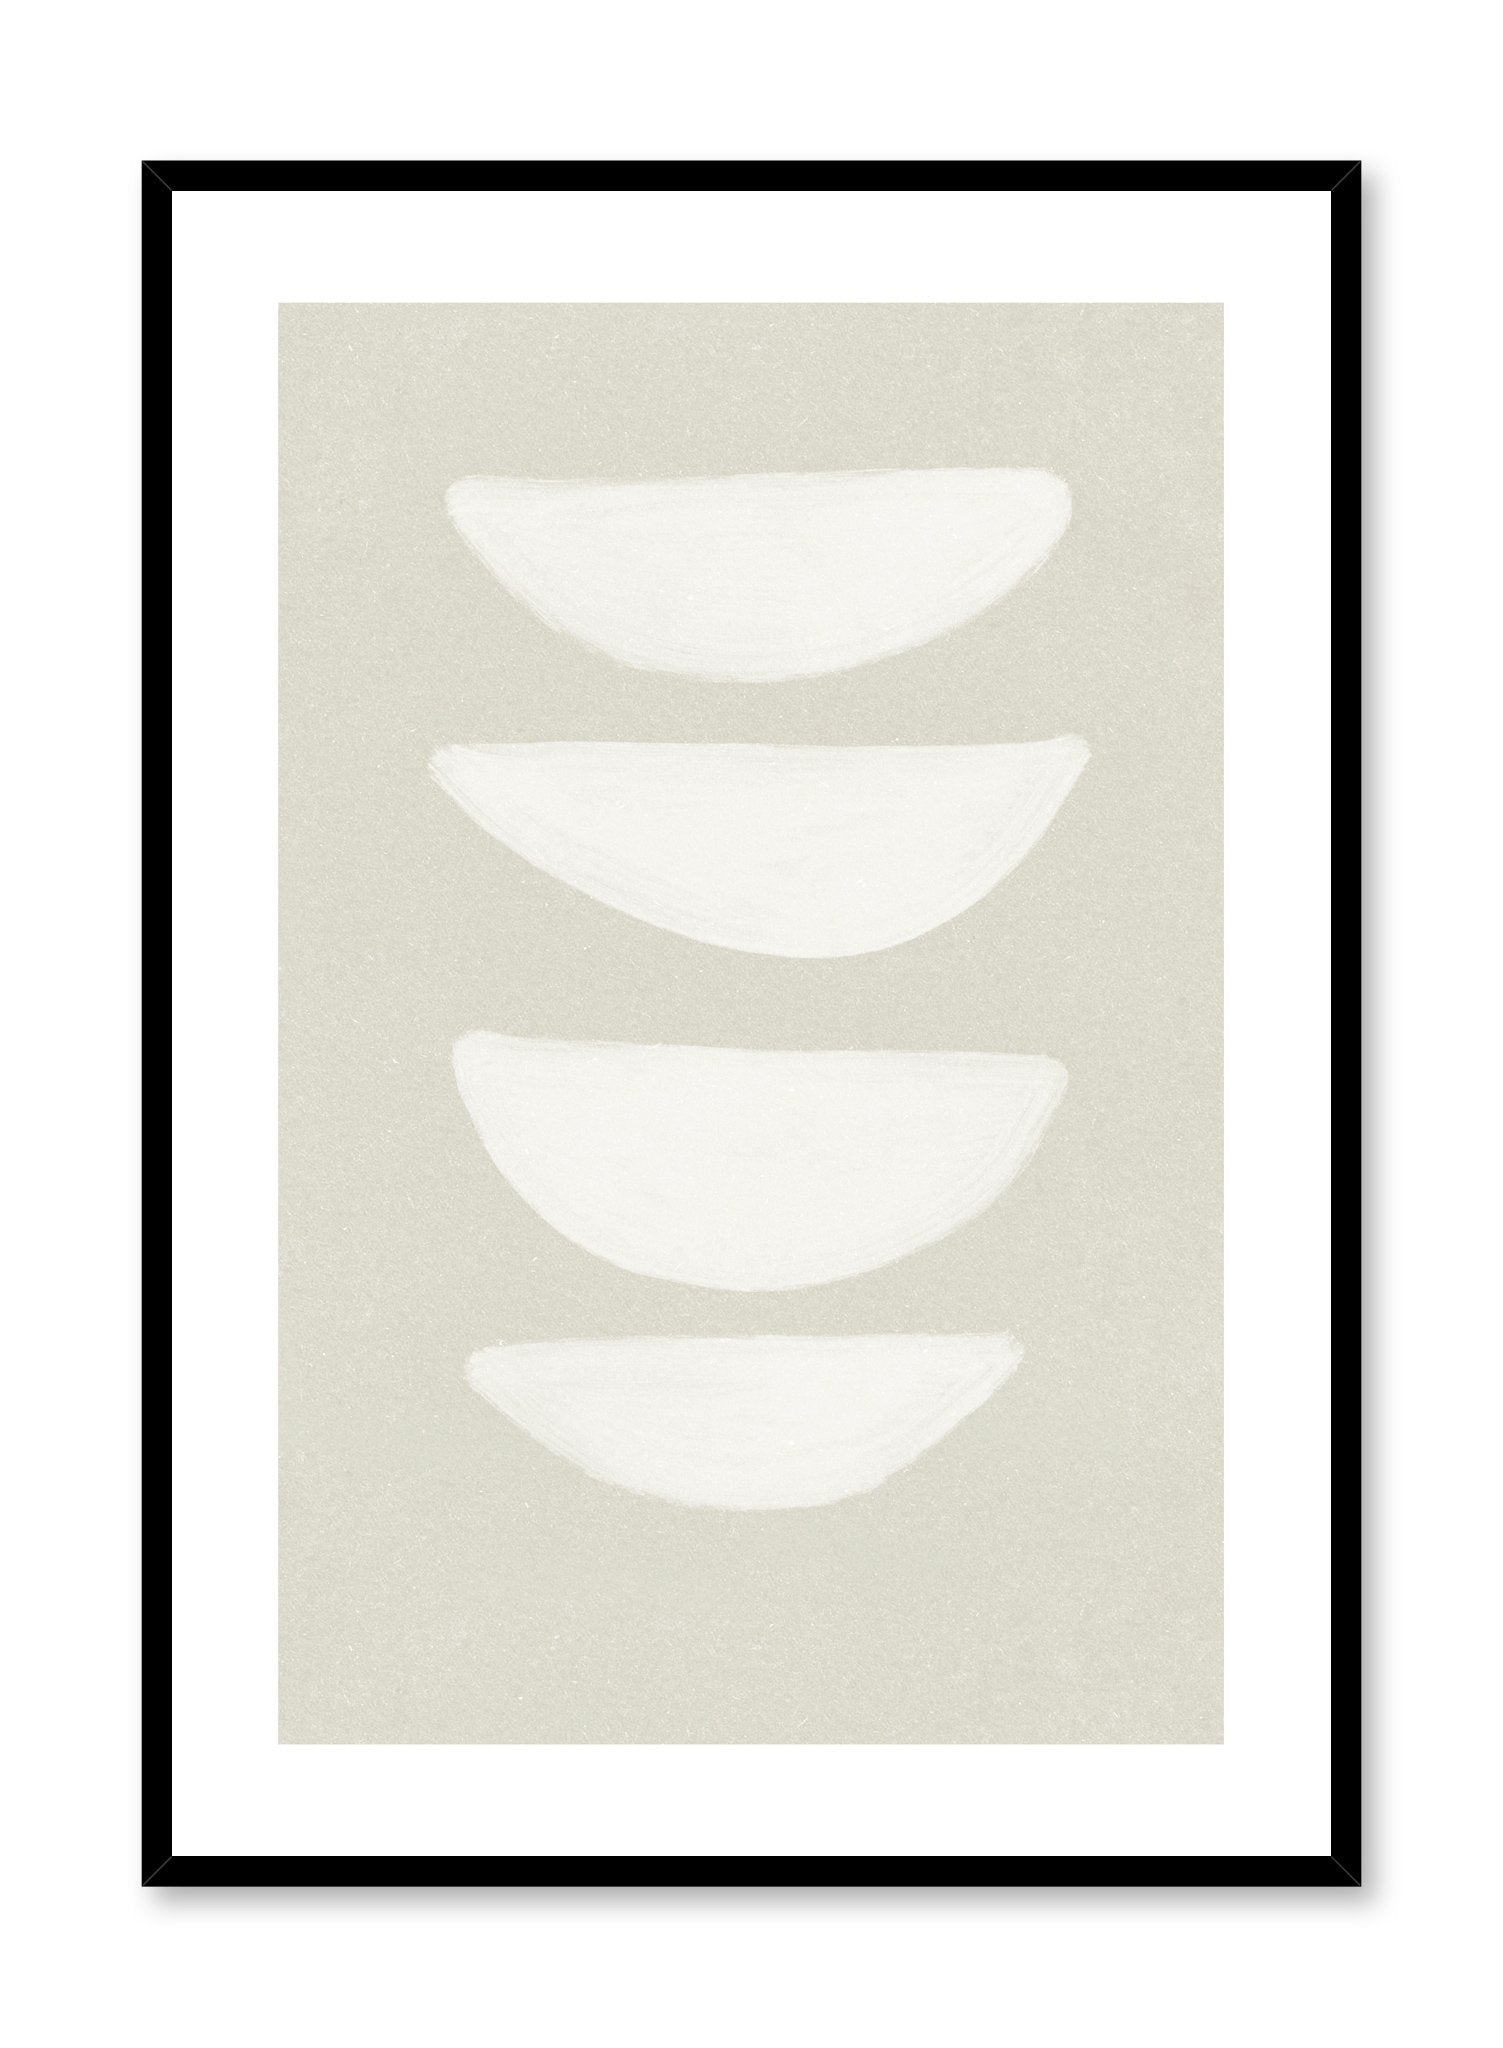 Modern abstract illustration poster by Opposite Wall with stacked bowl shapes on beige by Toffie Affichiste